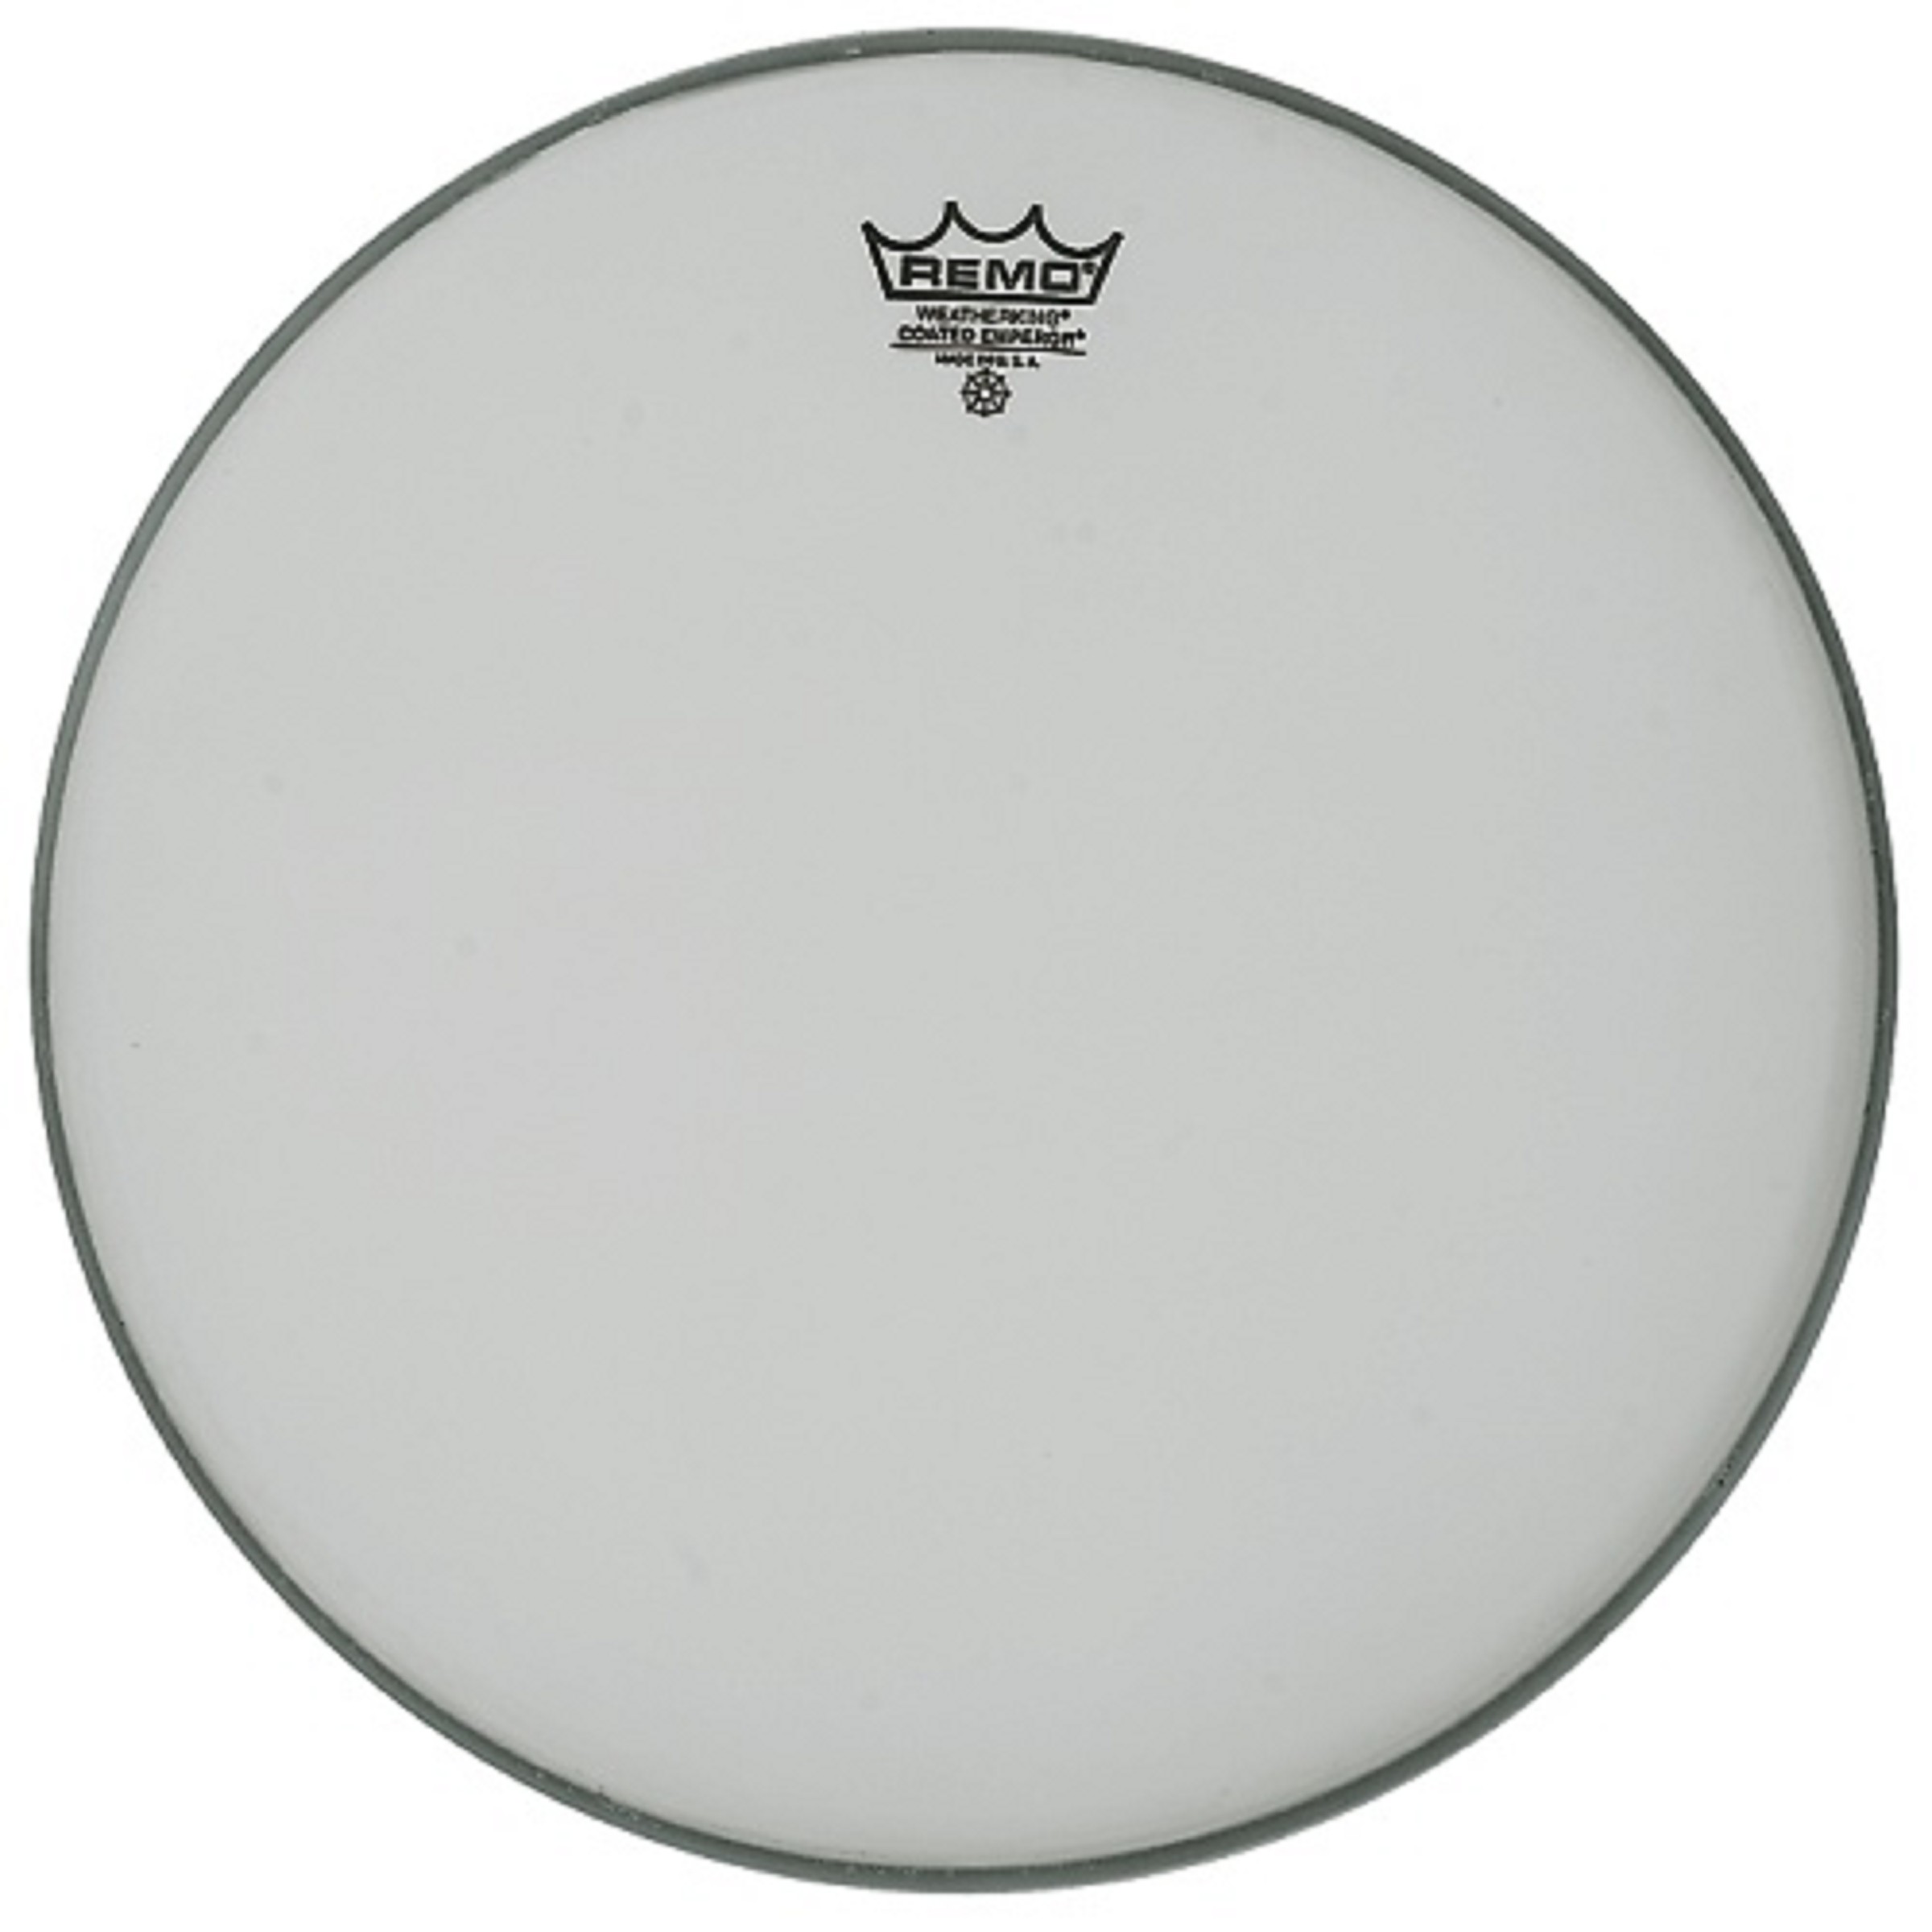 Remo Fell Emperor 14" Coated